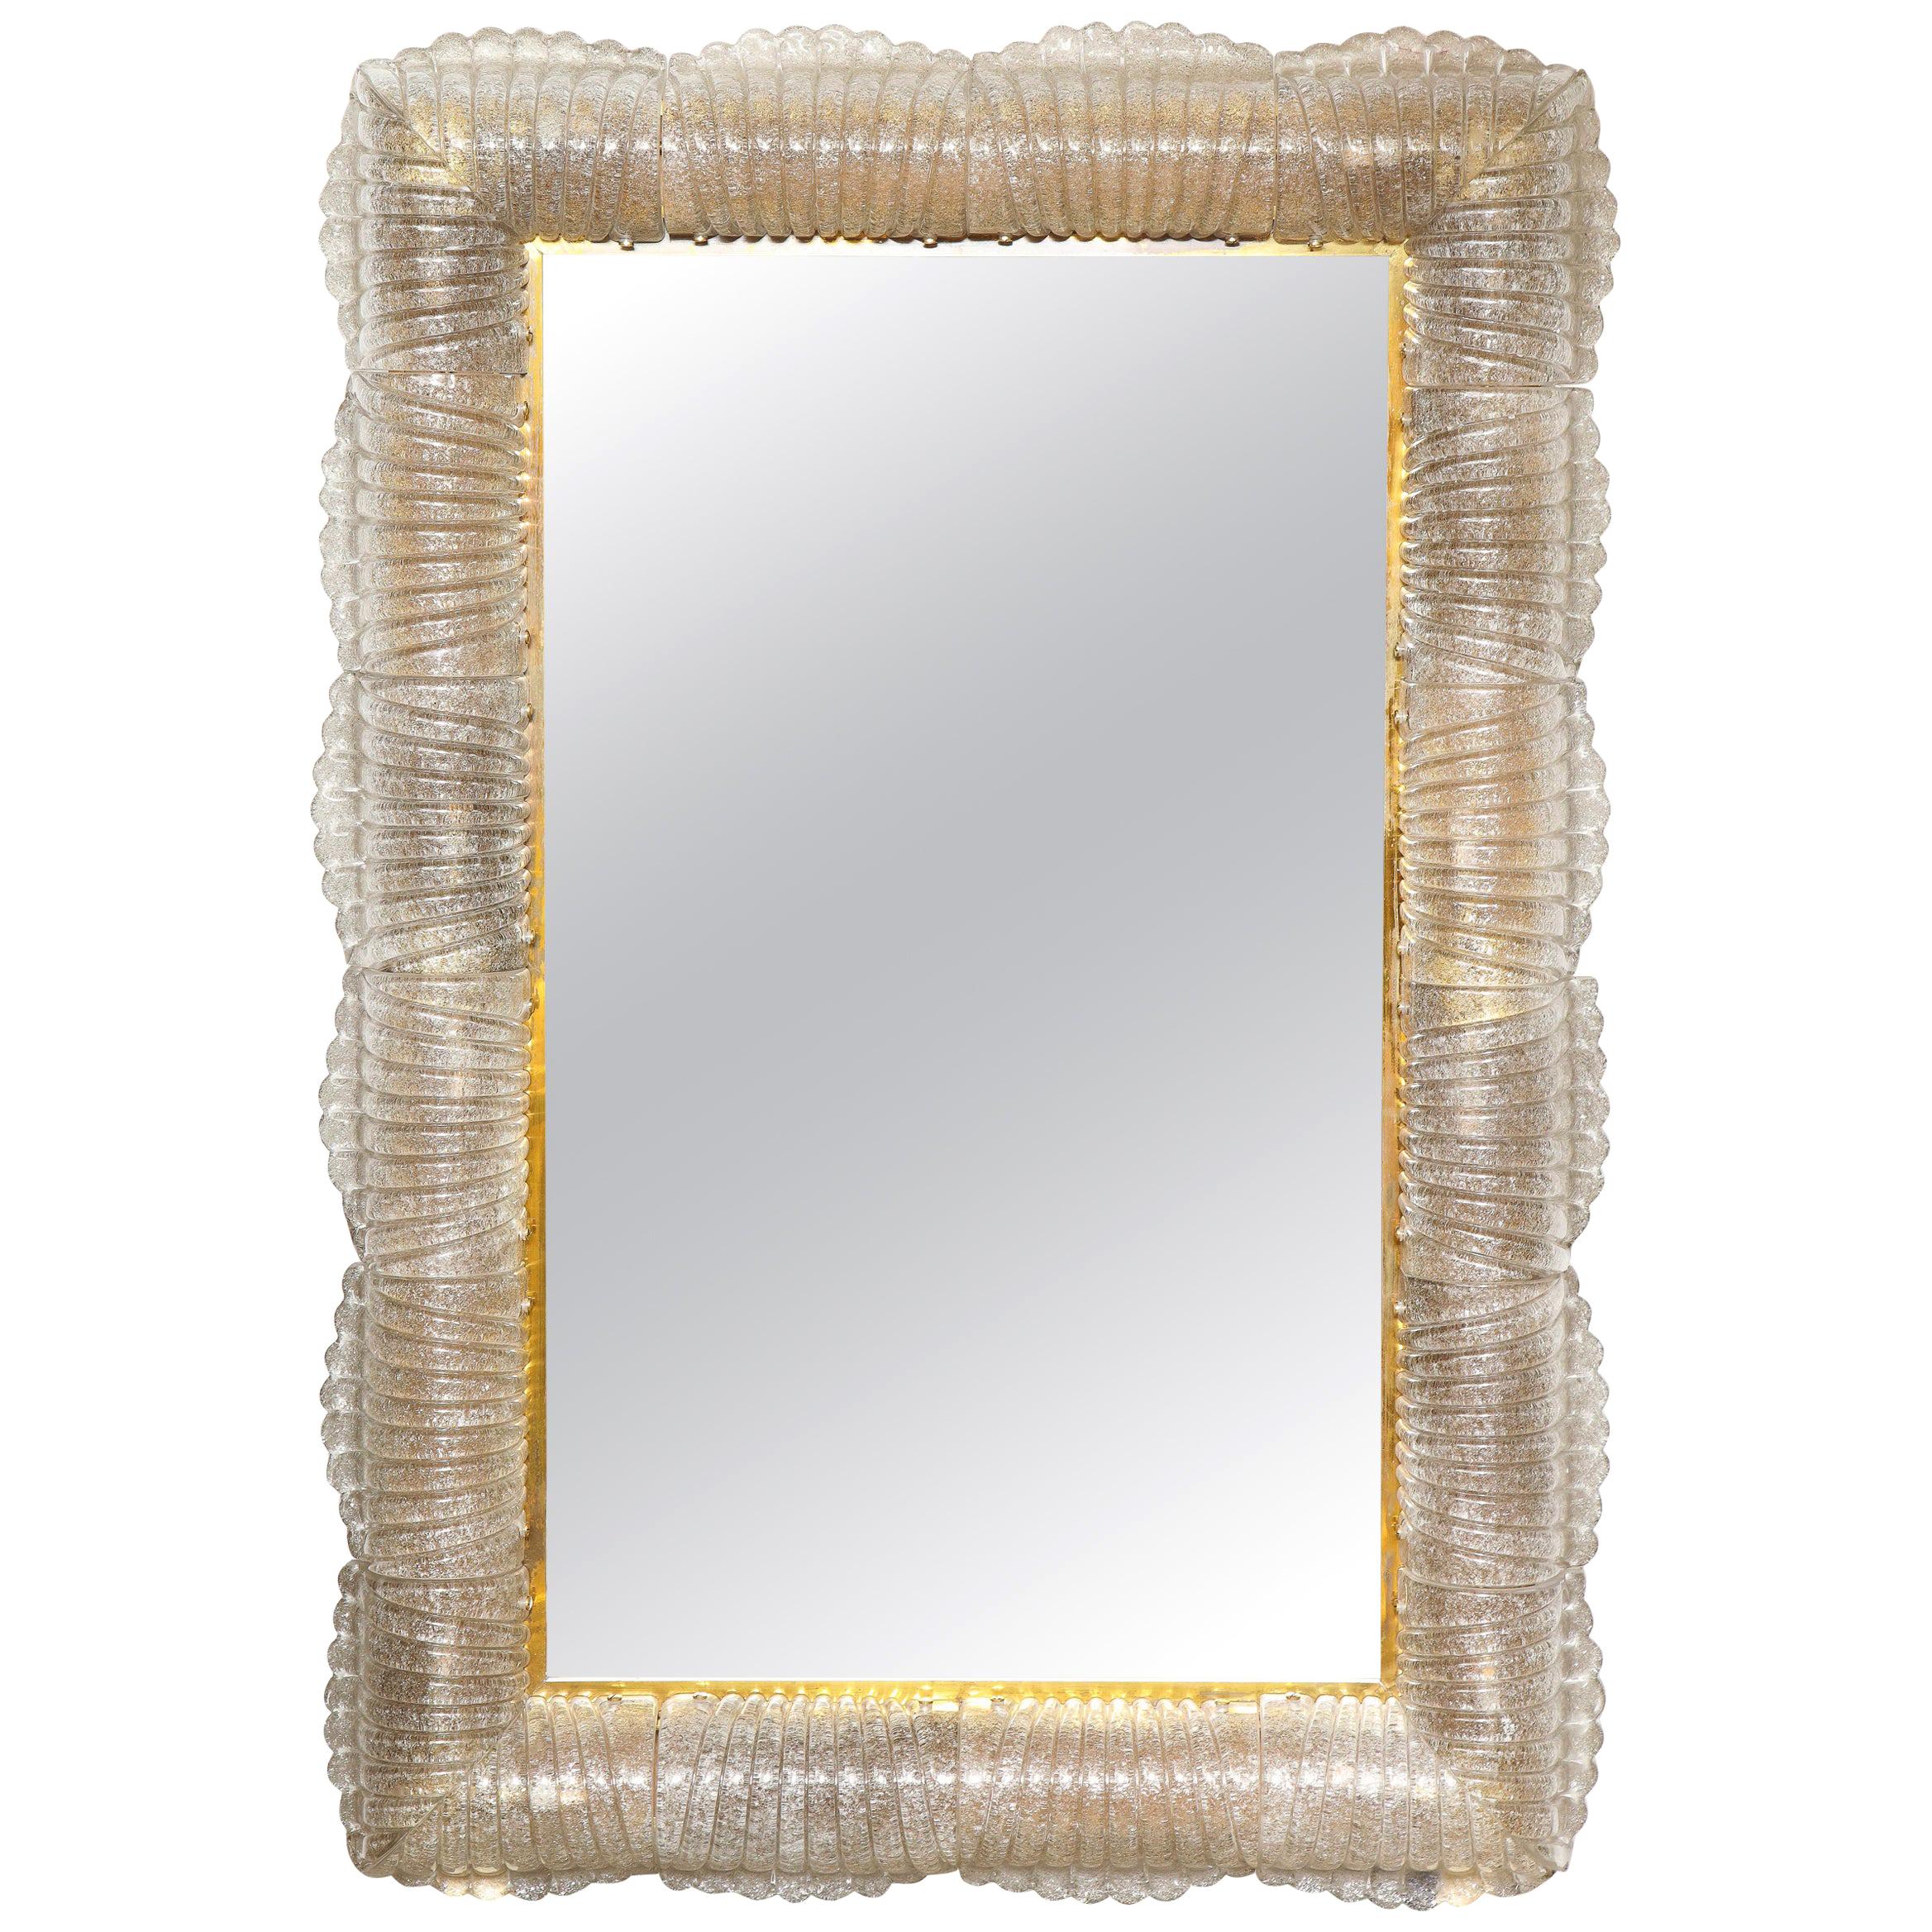 Single Textured Light Smoke Taupe Murano Glass and Brass Mirror, Lighted, Italy